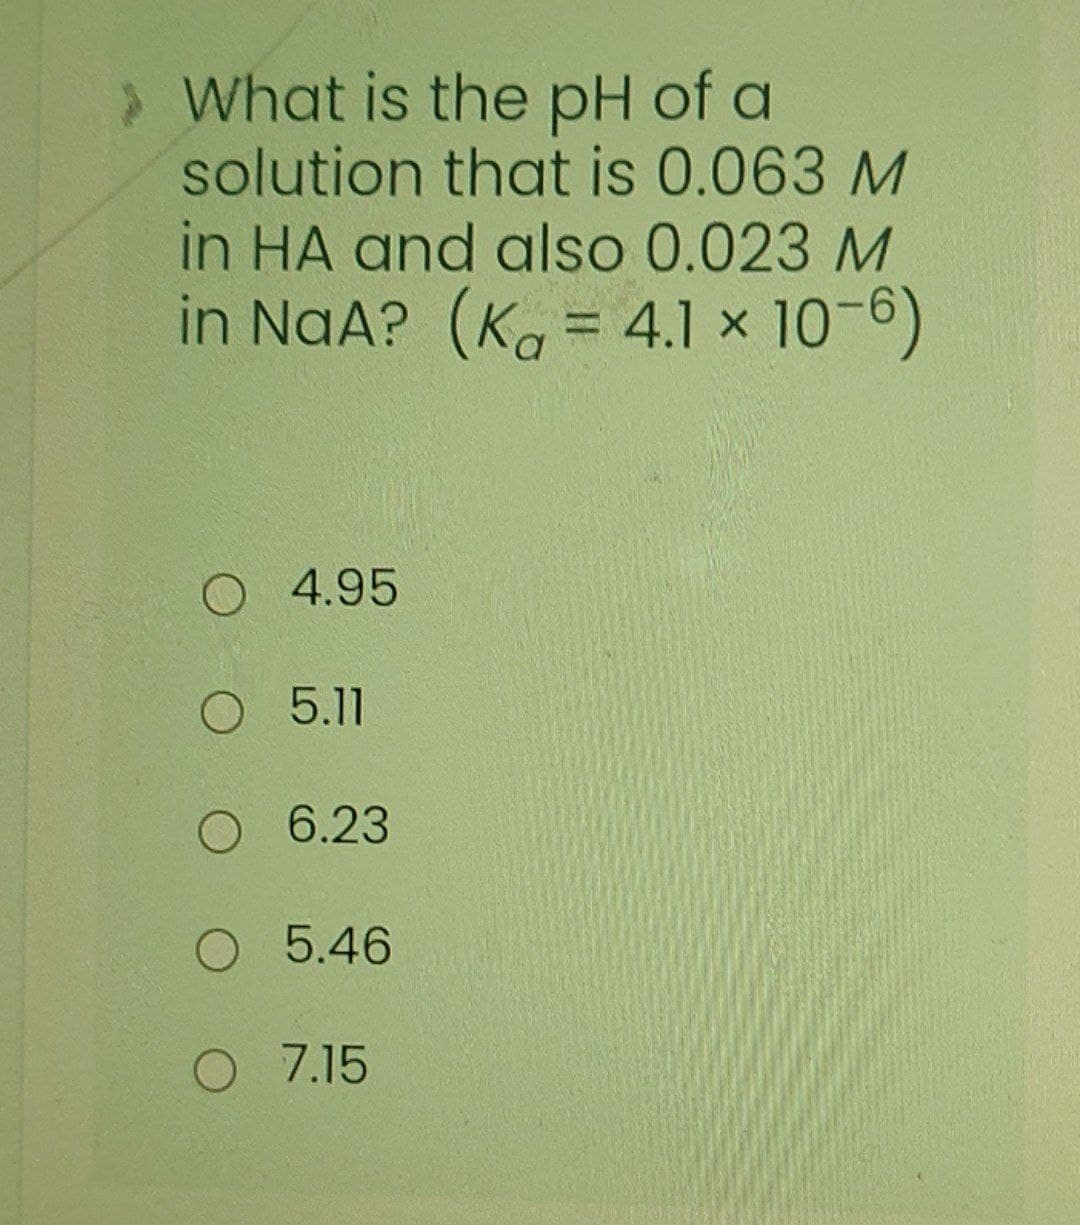 What is the pH of a
solution that is 0.063 M
in HA and also 0.023 M
in NaA? (Ko = 4.1 x 10-6)
%3D
O 4.95
O 5.11
O 6.23
O 5.46
O 7.15
